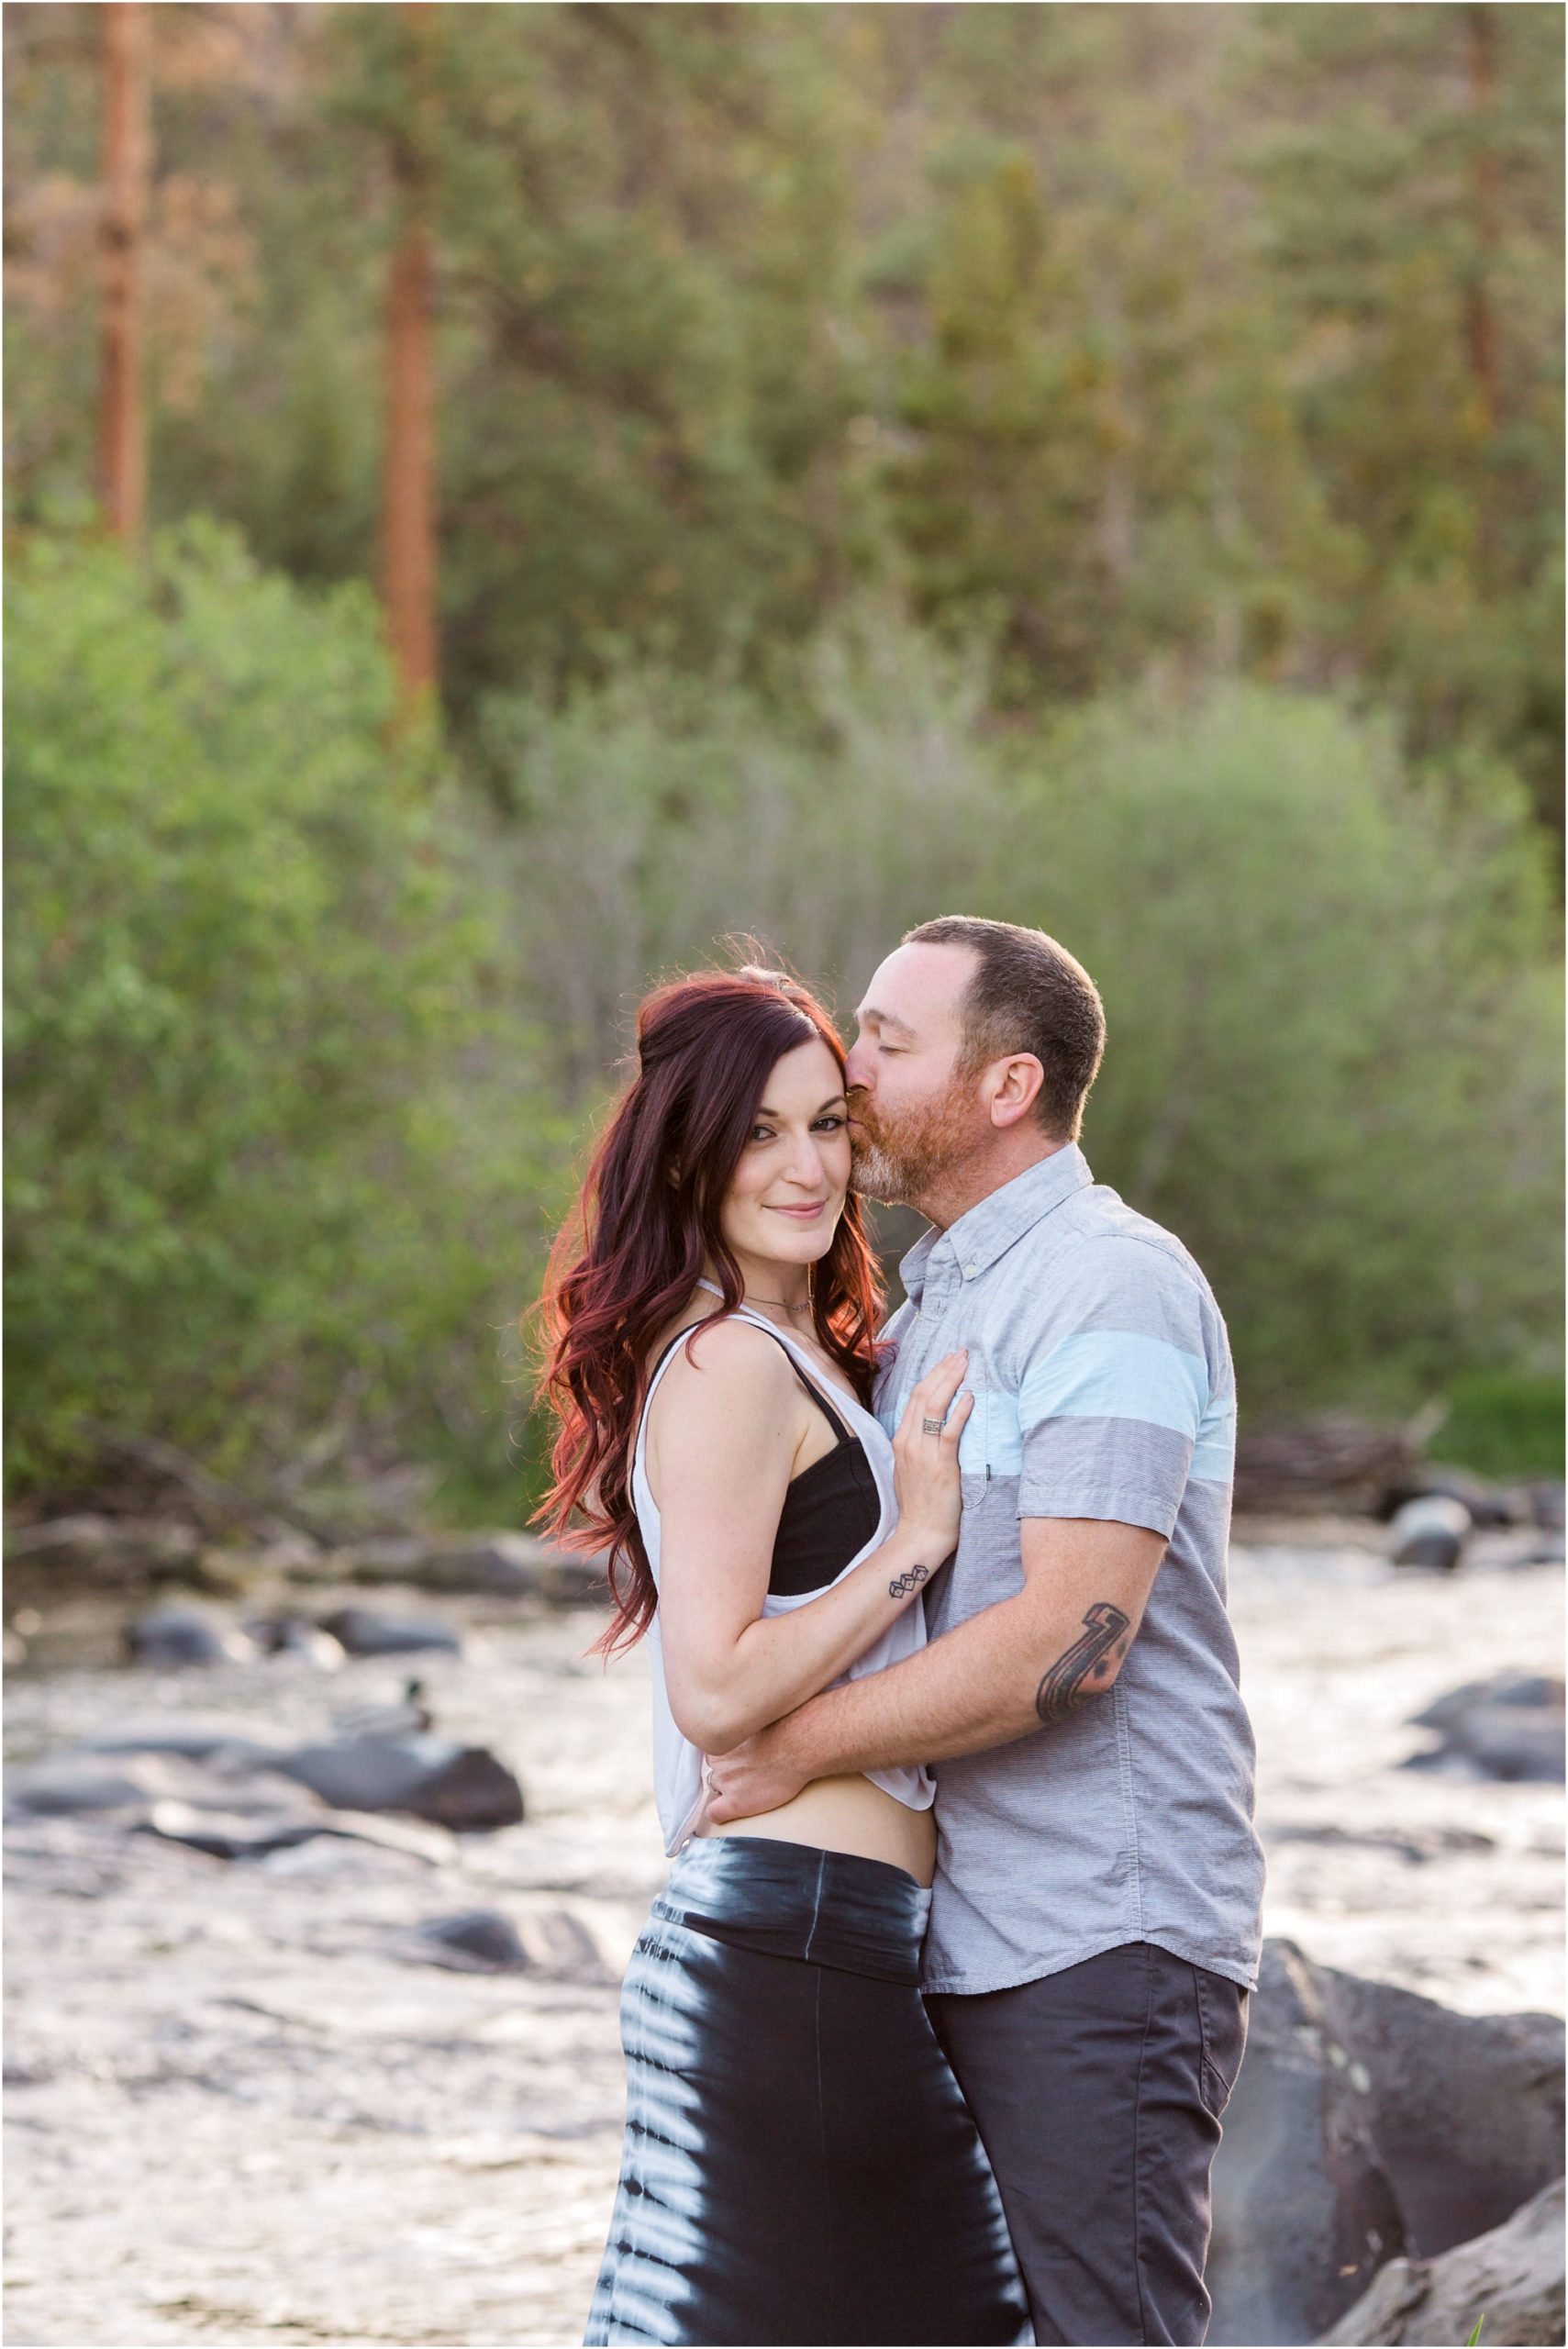 A stunning couple poses for their engagement photos in Bend, OR. | Erica Swantek Photography